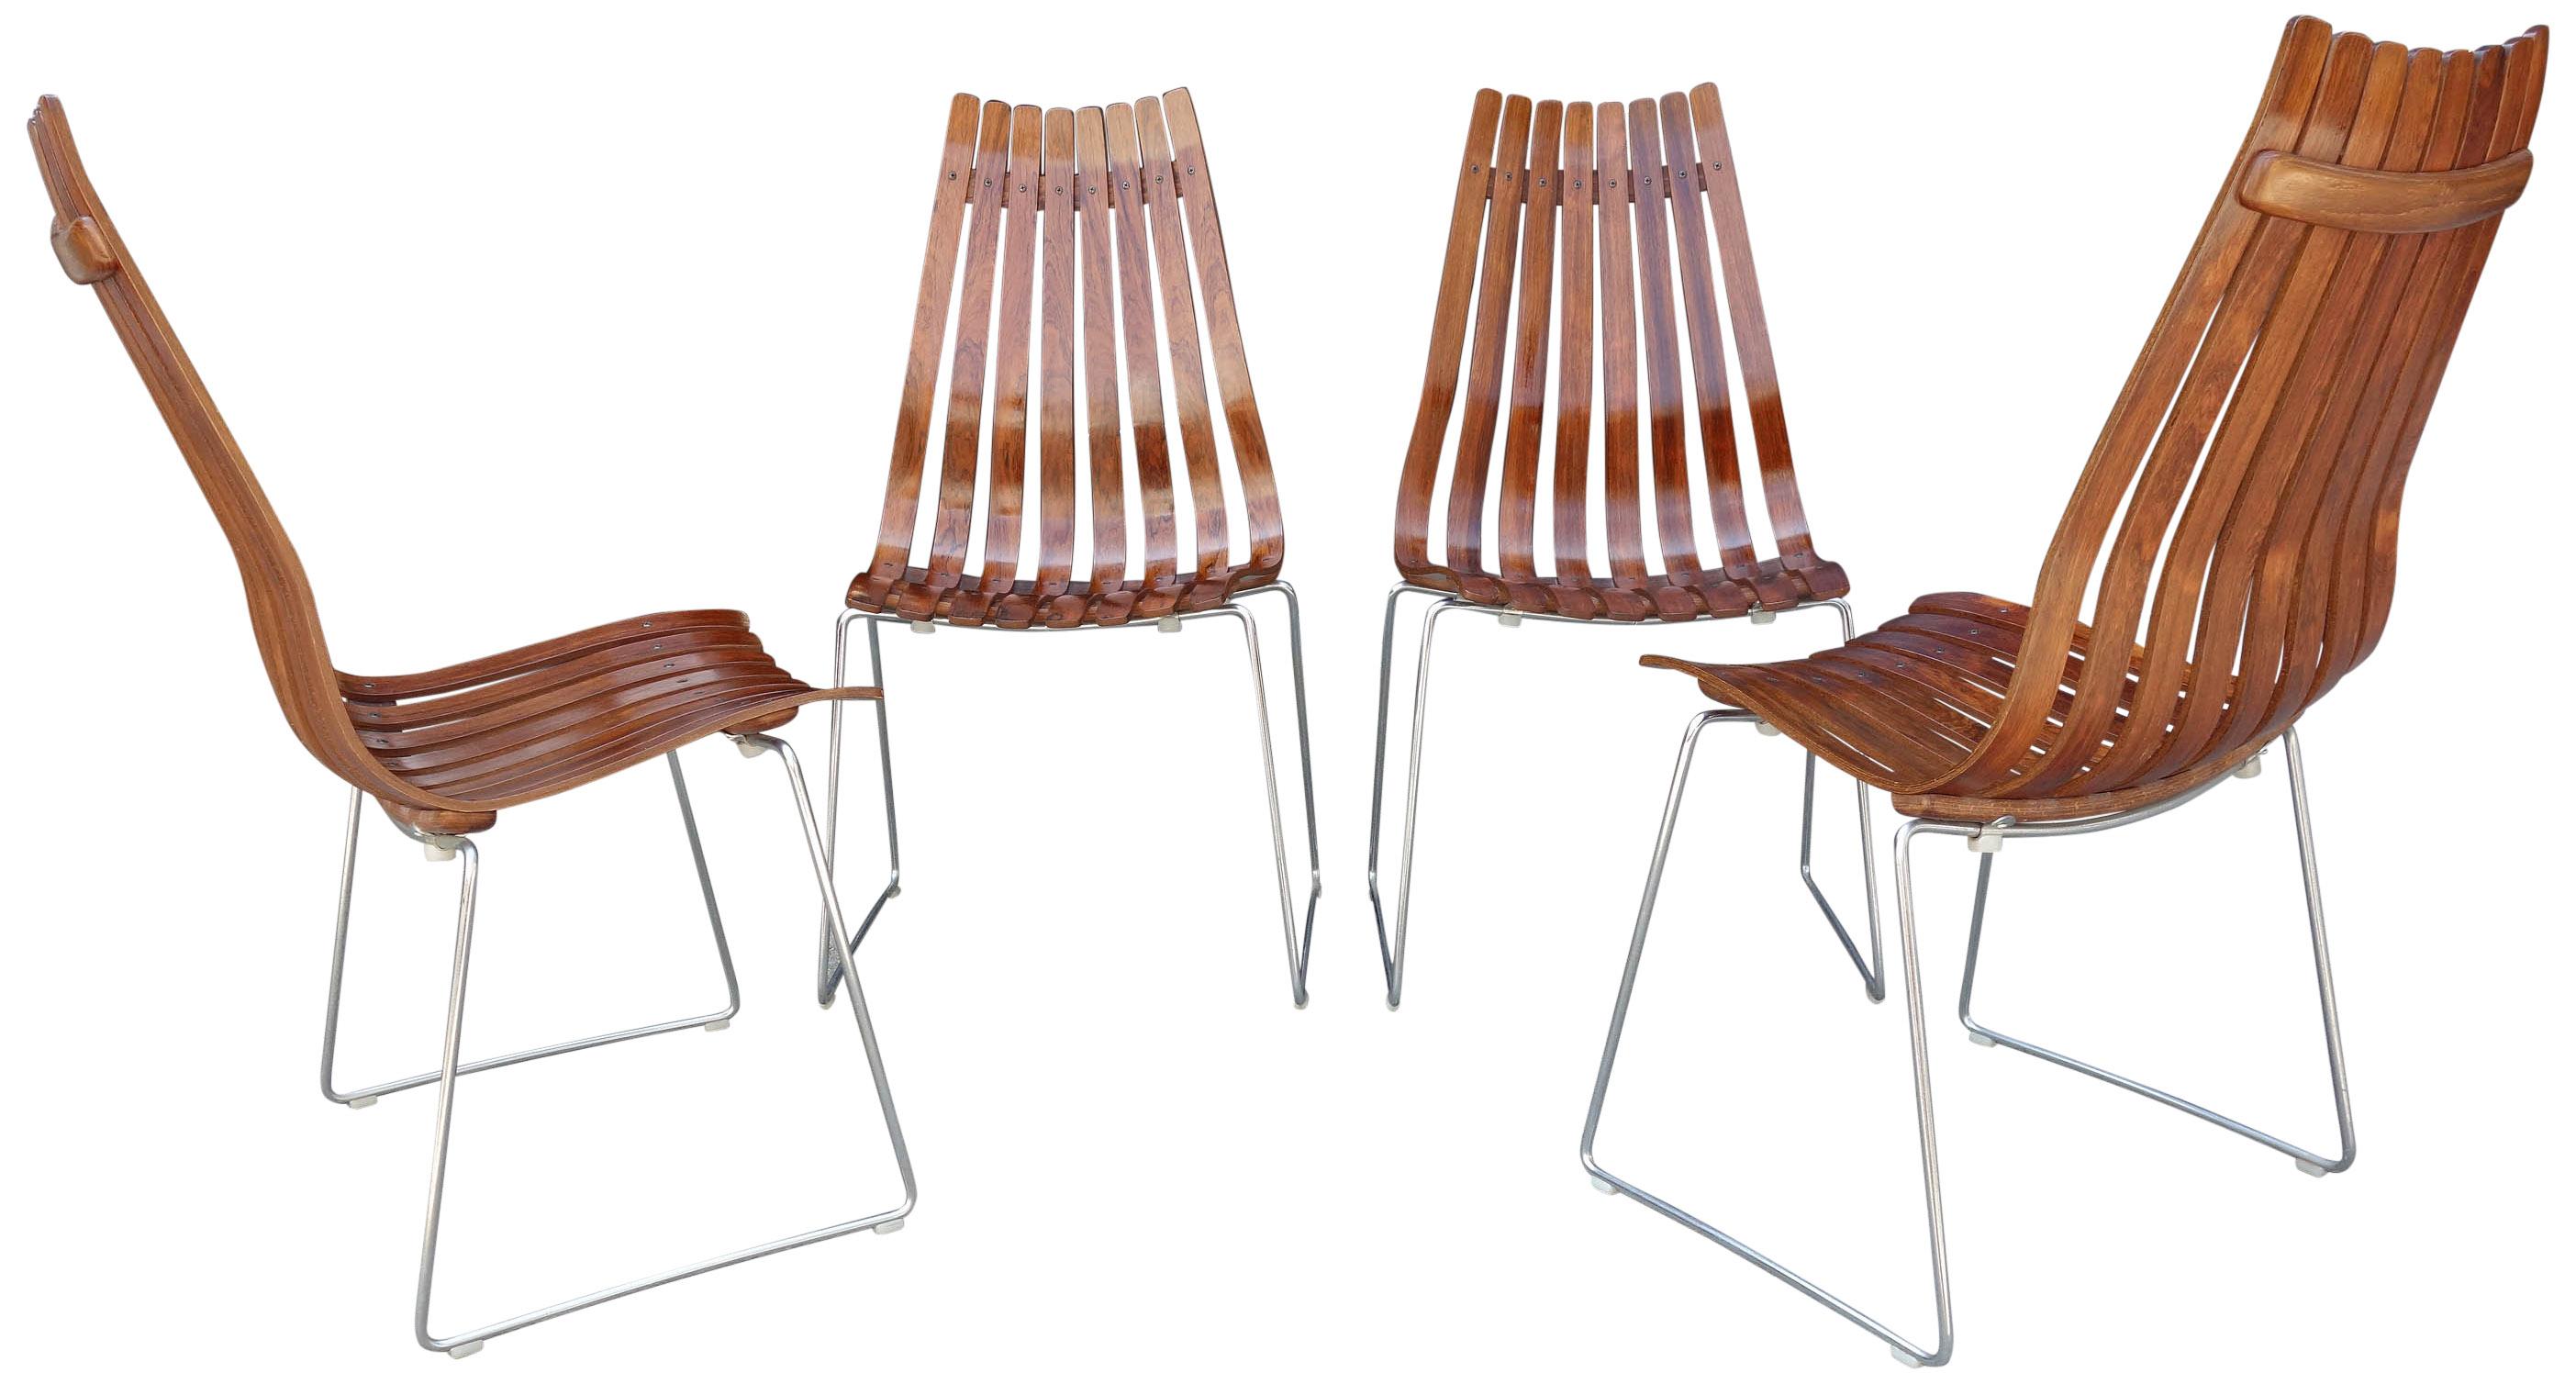 Norwegian Midcentury Scandia Chairs by Hans Brattrud for Hove Mobler